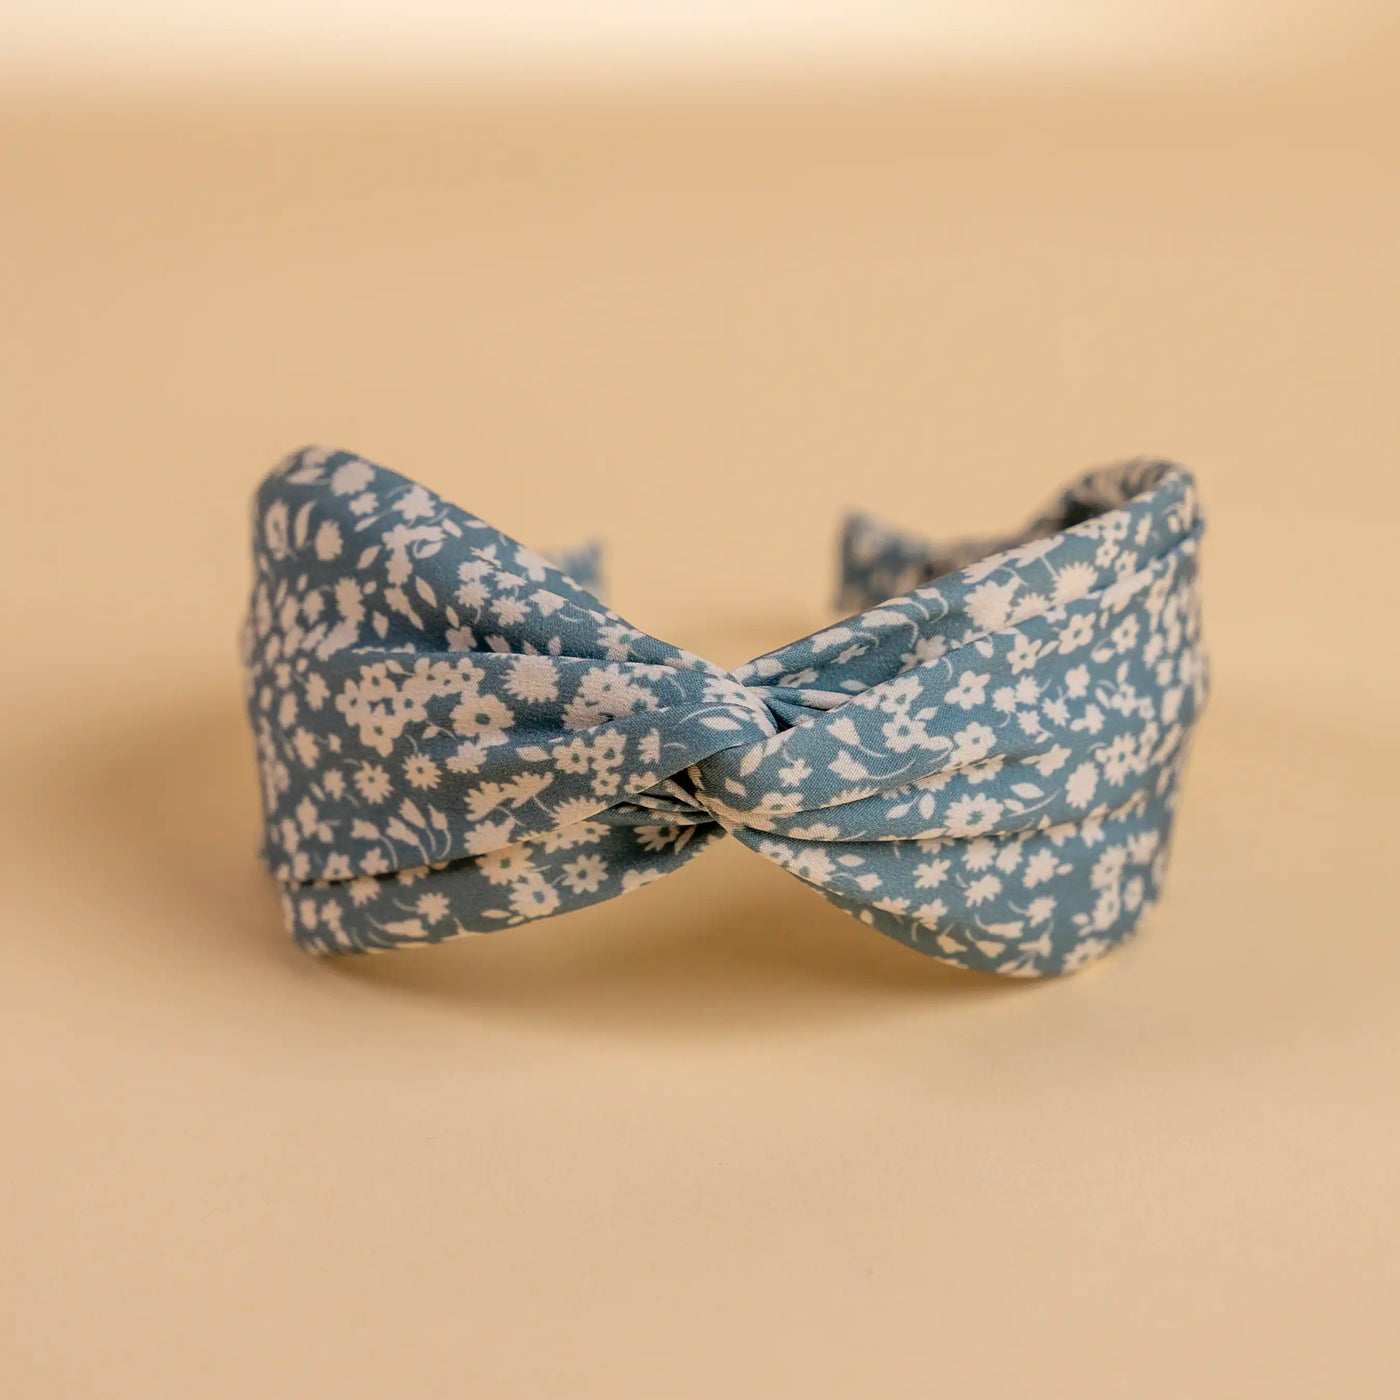 Lucys blue and white simple floral headband. Light blue background with simple white floral pattern. Front view. 